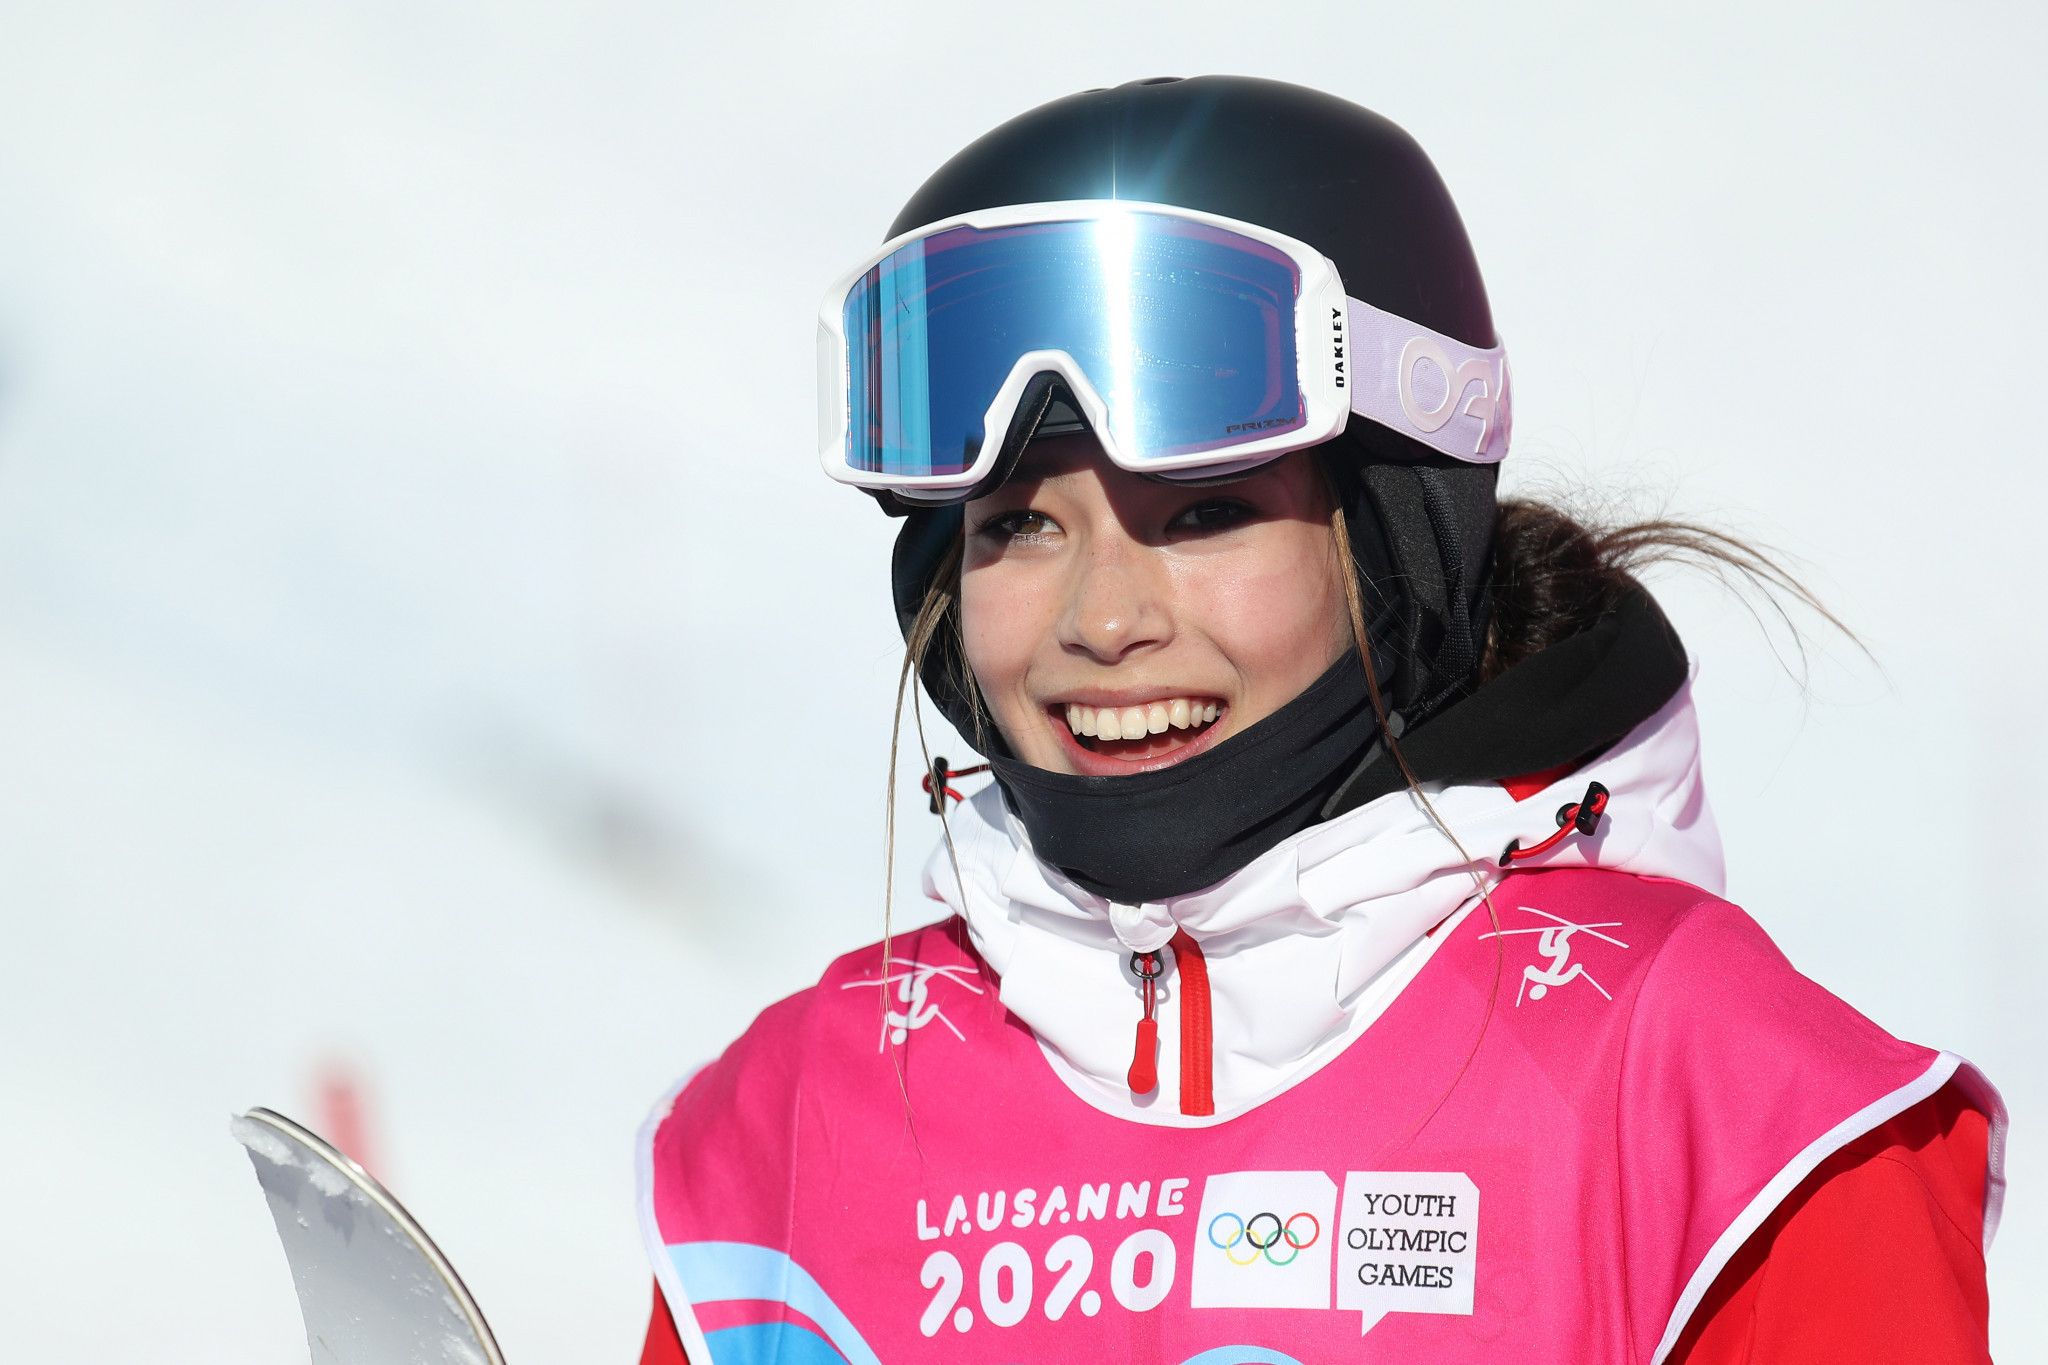 Sixteen-year-old Eileen Gu made history by winning slopestyle gold in Calgary ©Getty Images